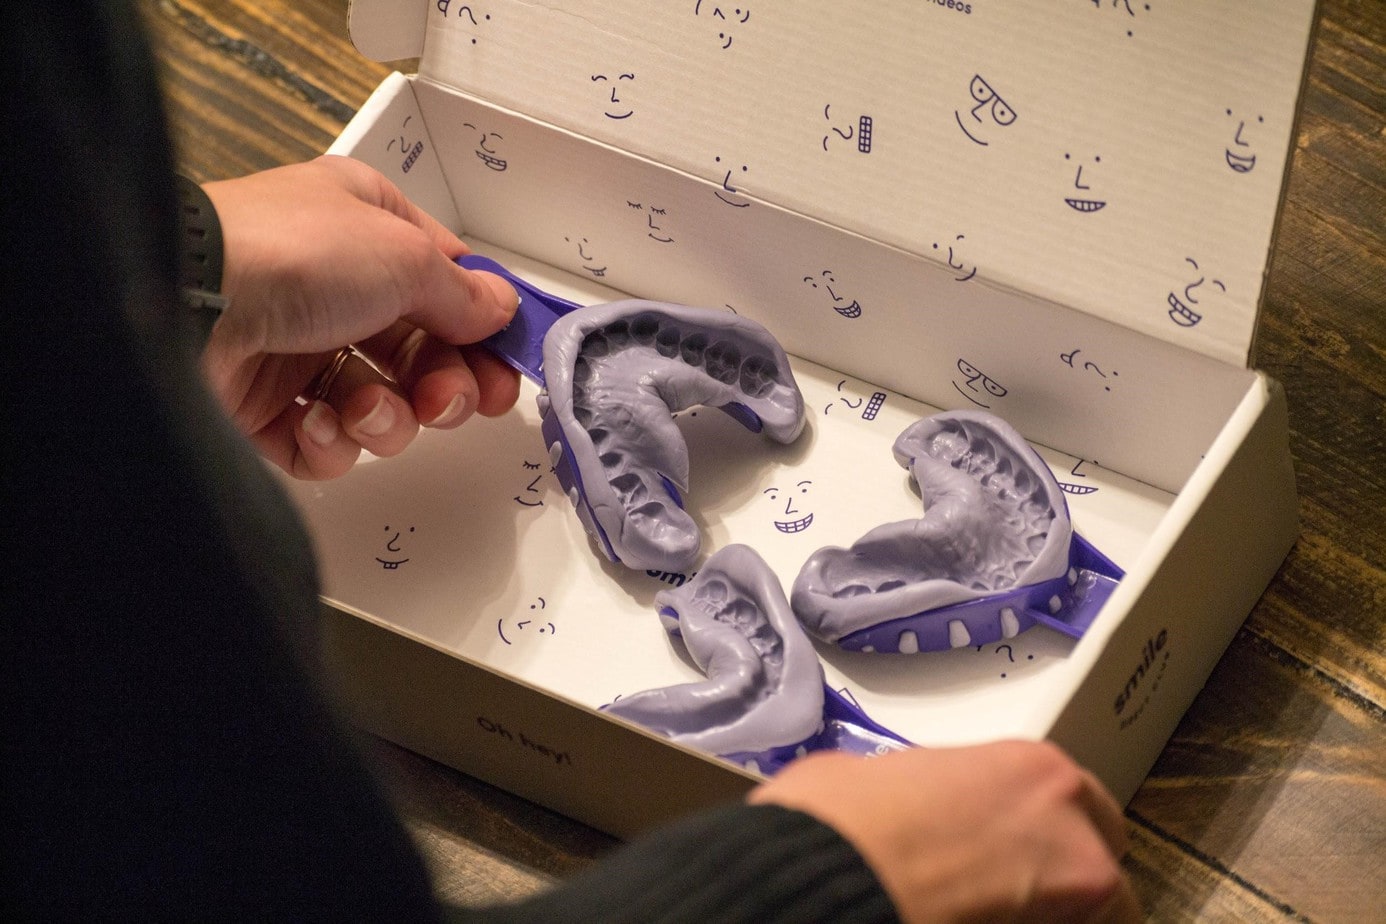 Person placing completed impressions in a box